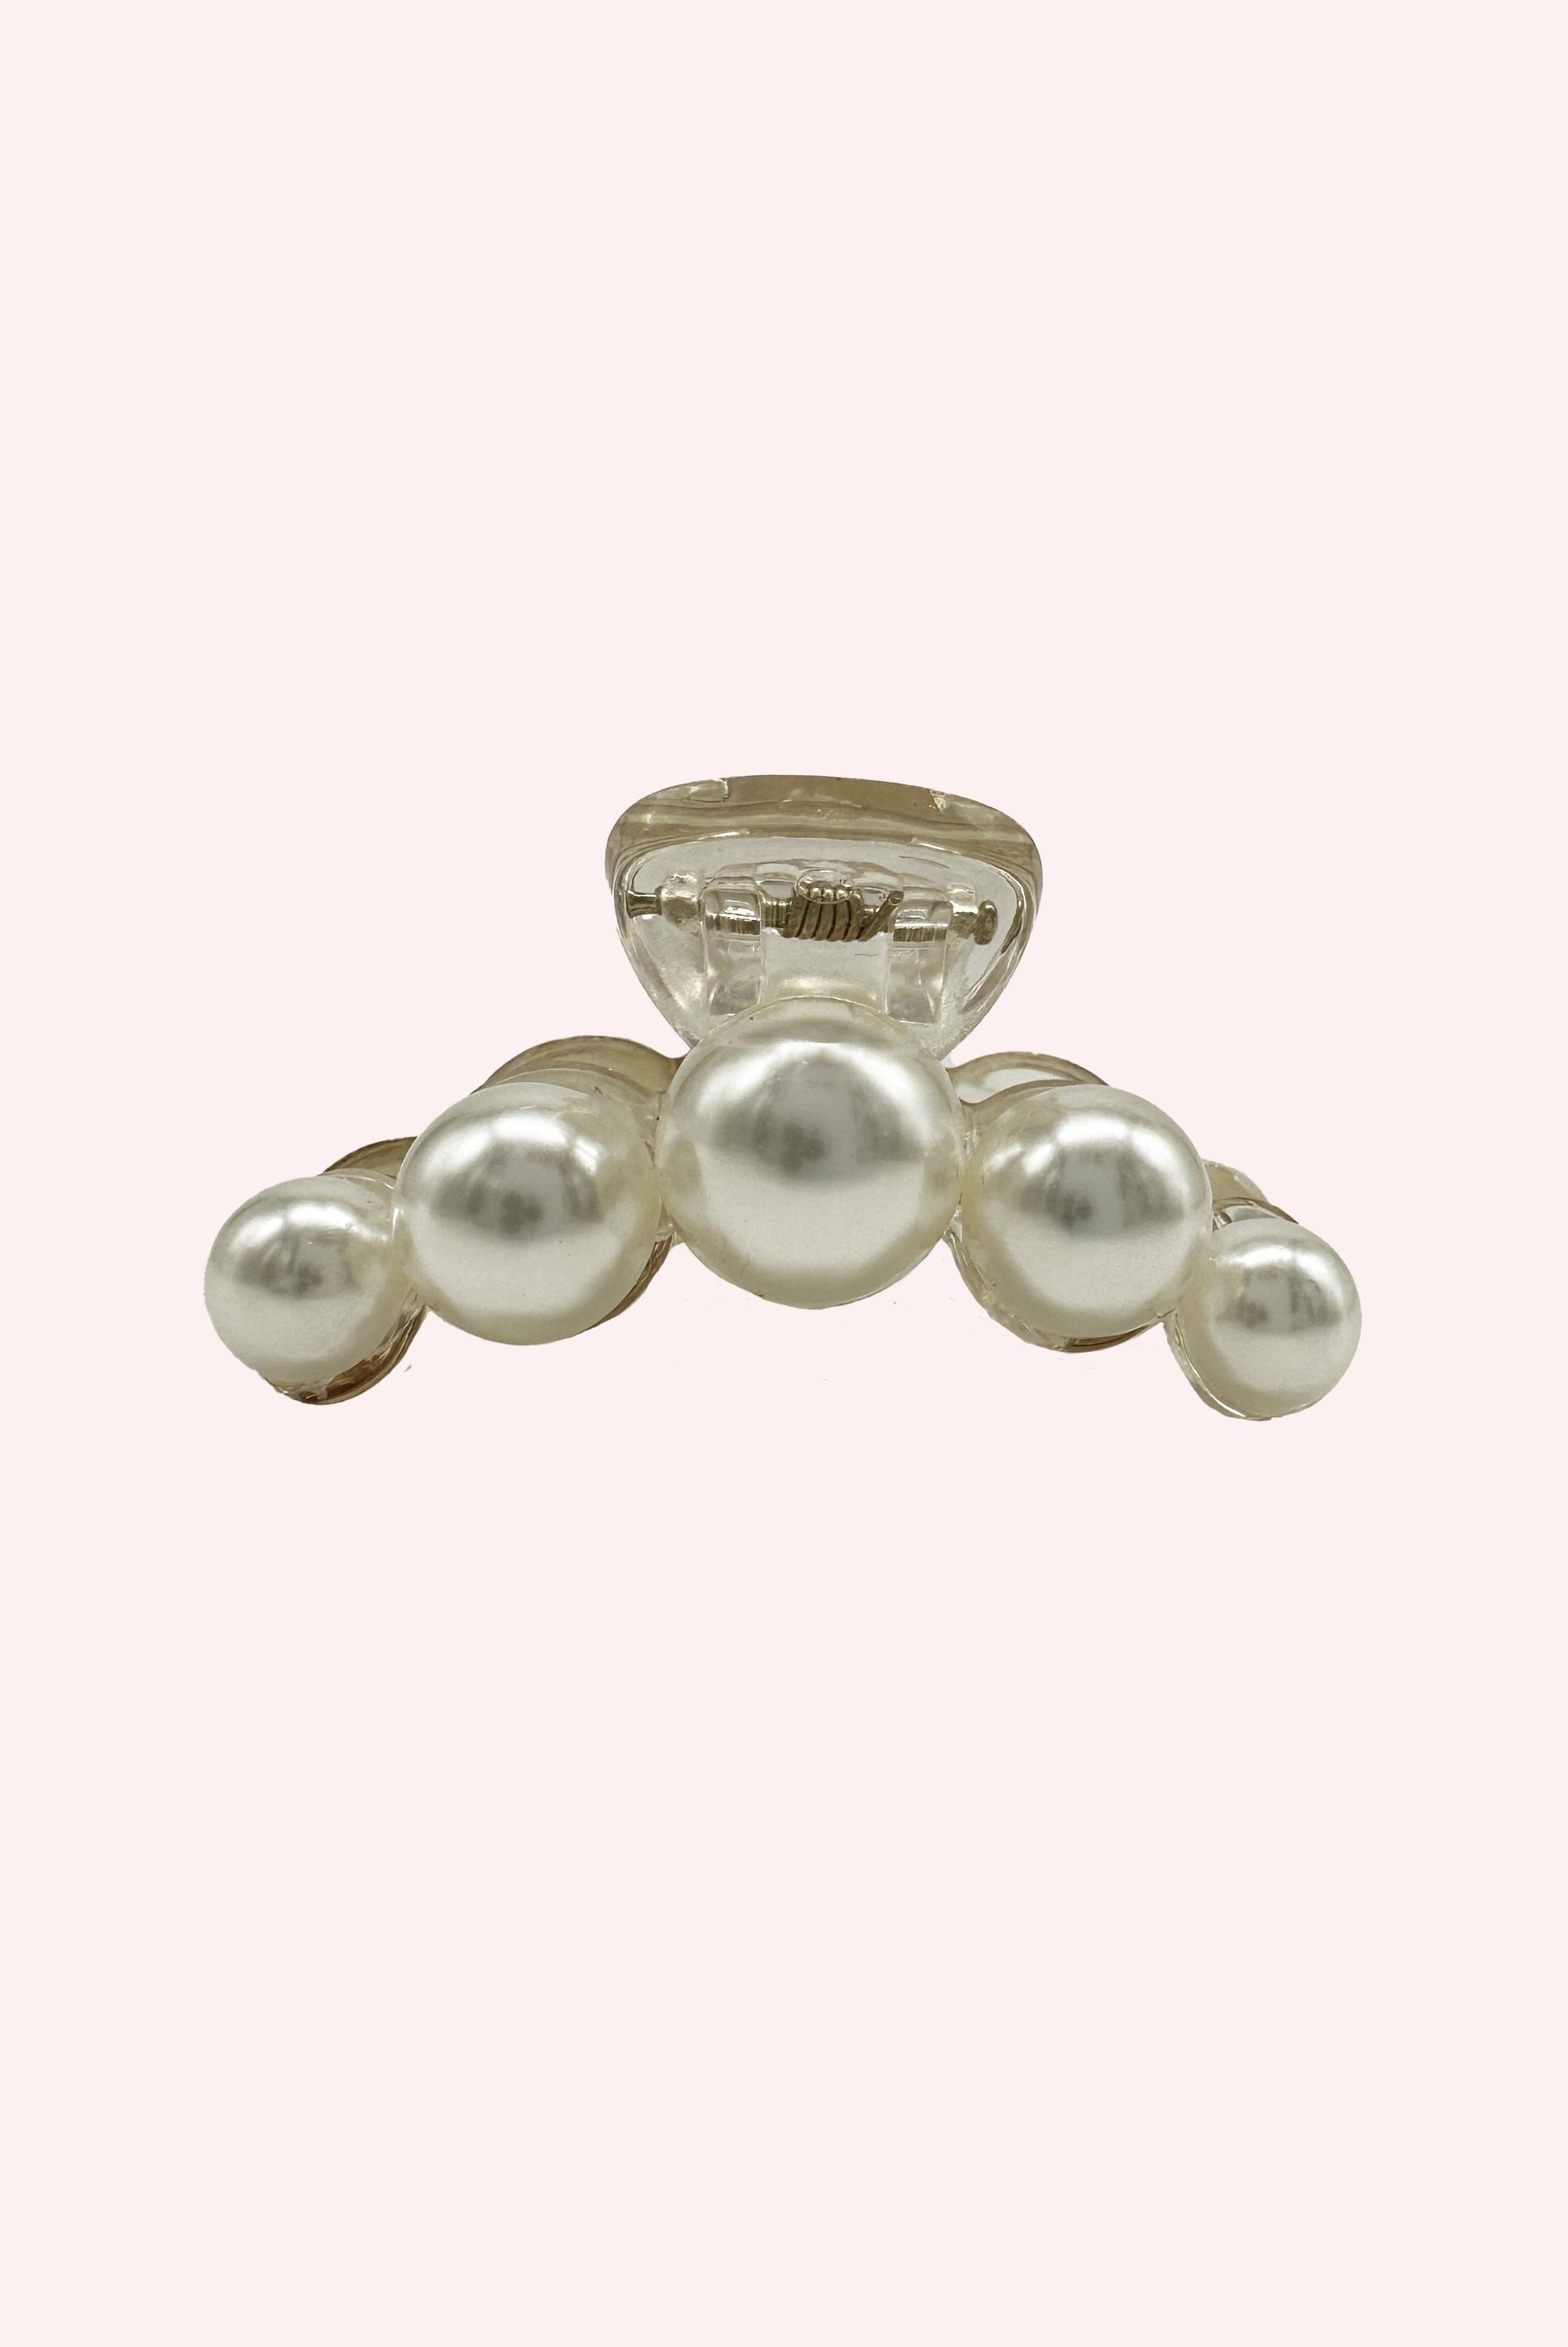 String of Pearls Mini Jaw Clip, small arc with 5-Acetate plastic pearls fun to your everyday hairstyle